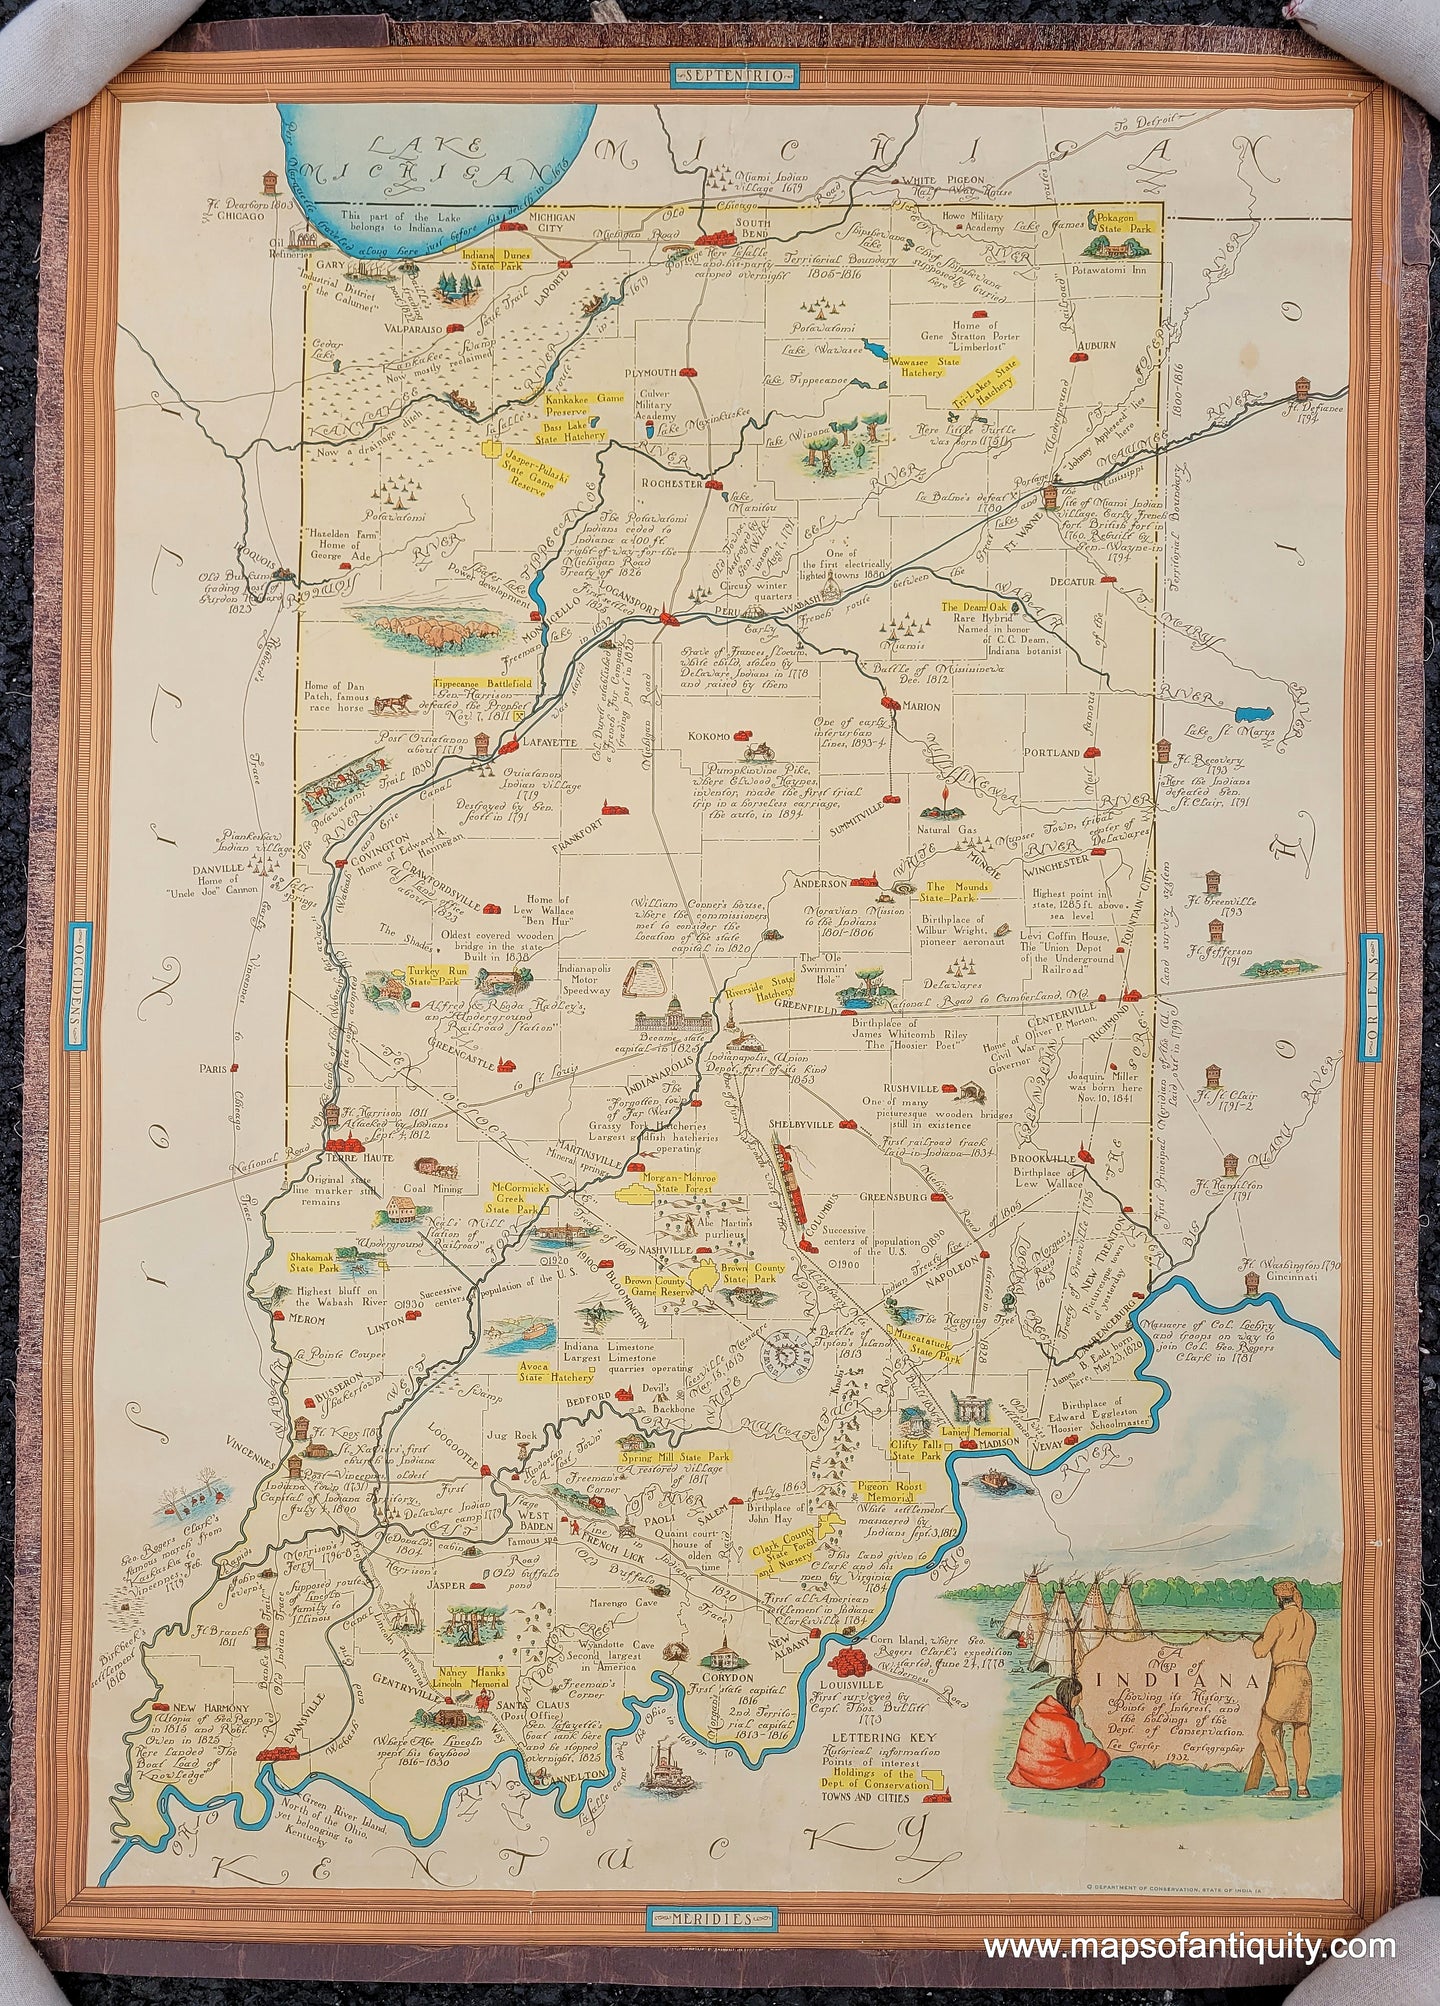 Genuine-Antique-Map-A-Map-of-Indiana-Showing-its-History-Points-of-Interest-and-the-Holdings-of-the-Dept-Of-Conservation--1932-Lee-Carter-Maps-Of-Antiquity